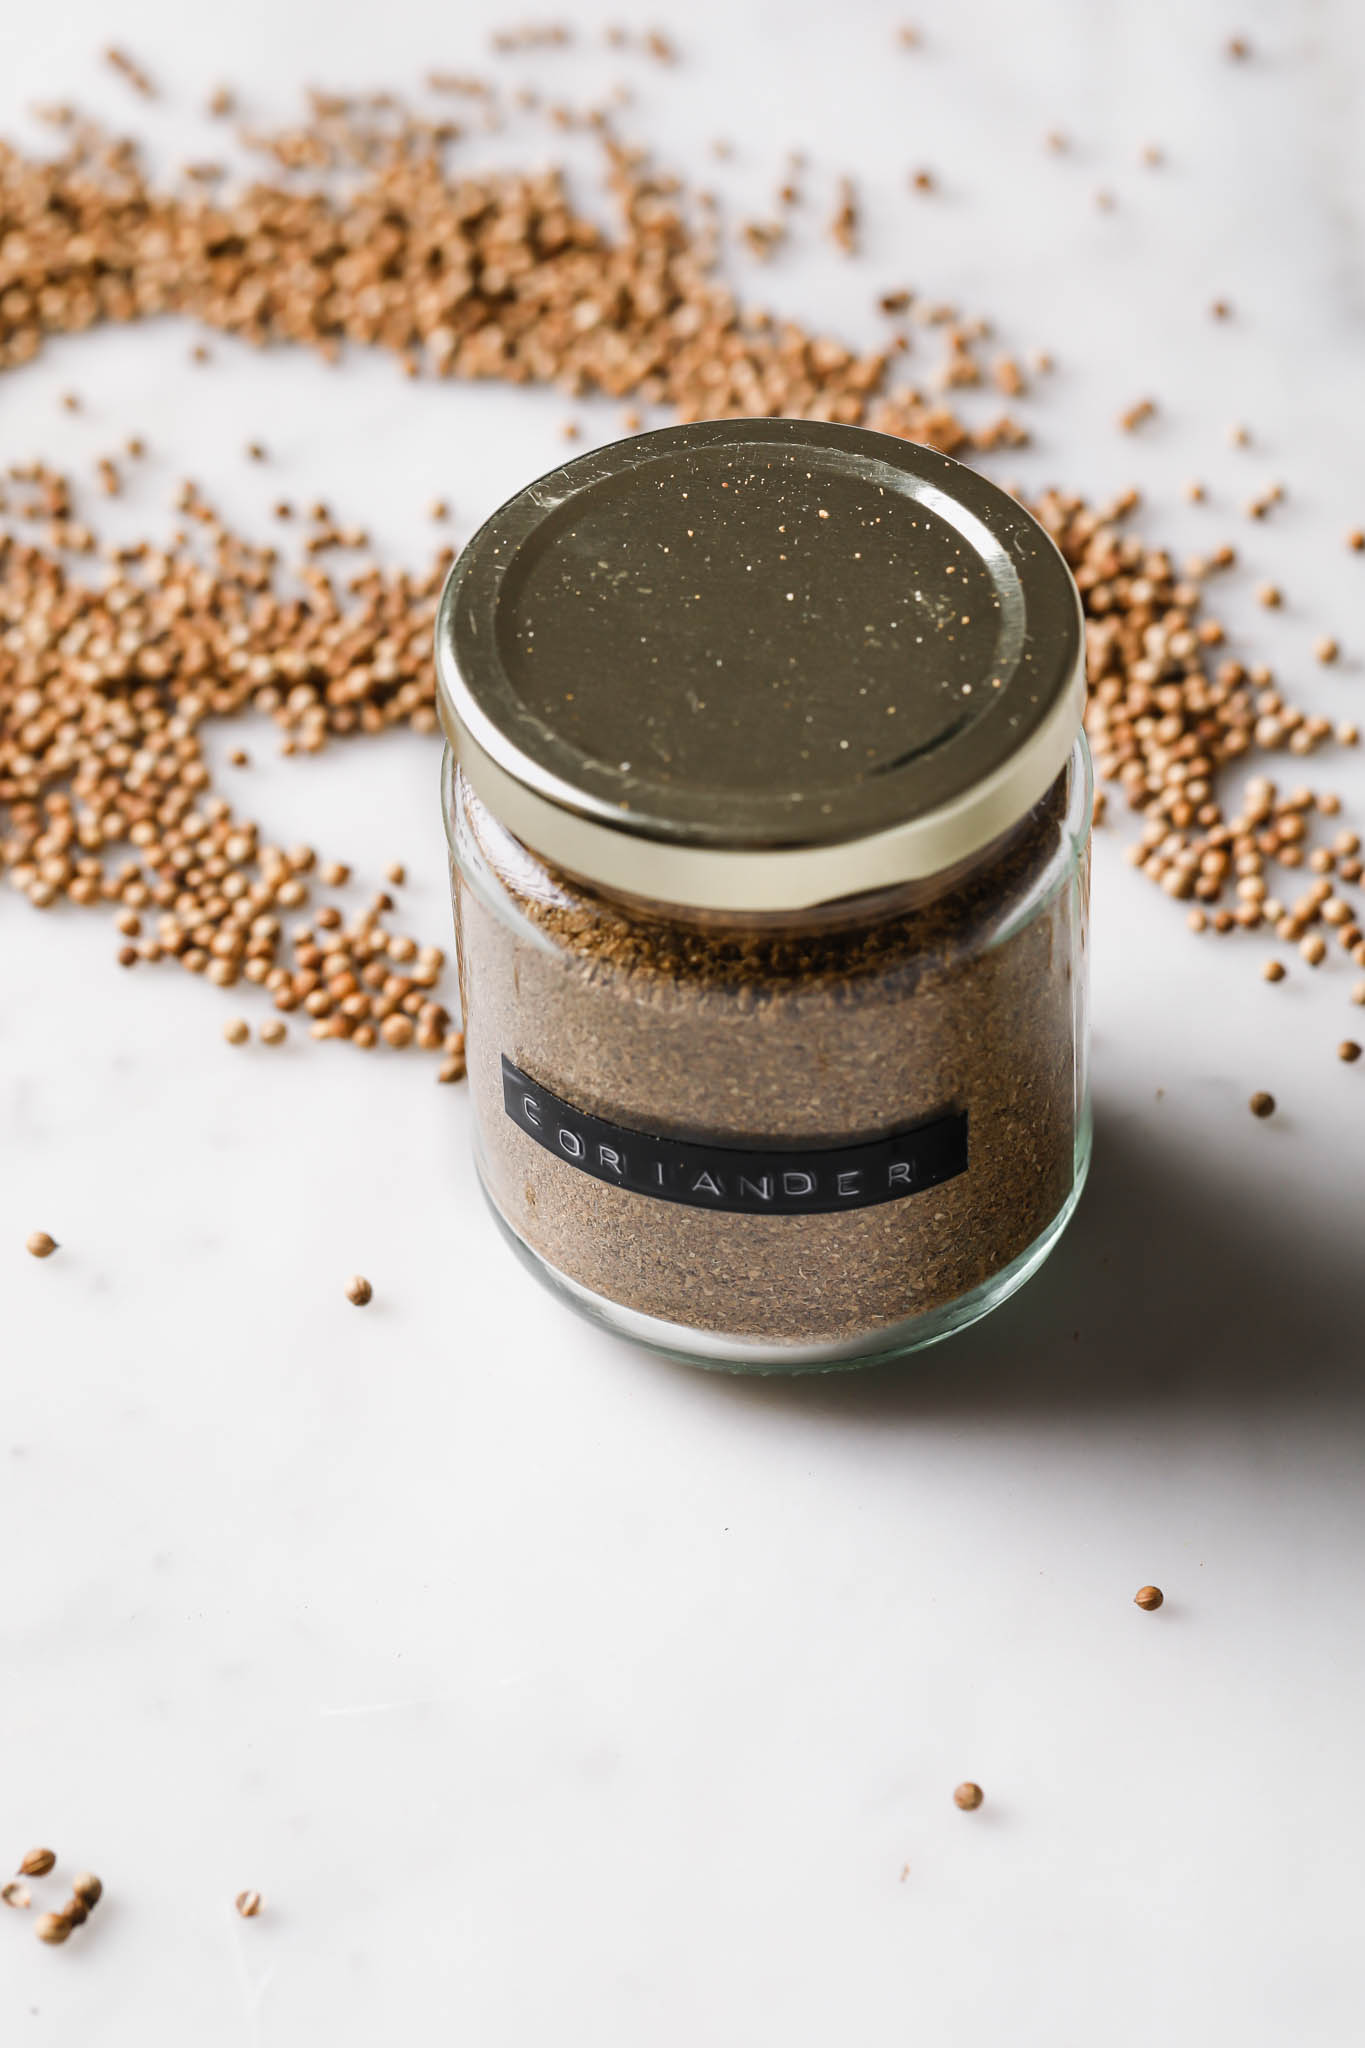 Coriander powder in a small spice jar covered with gold lid.